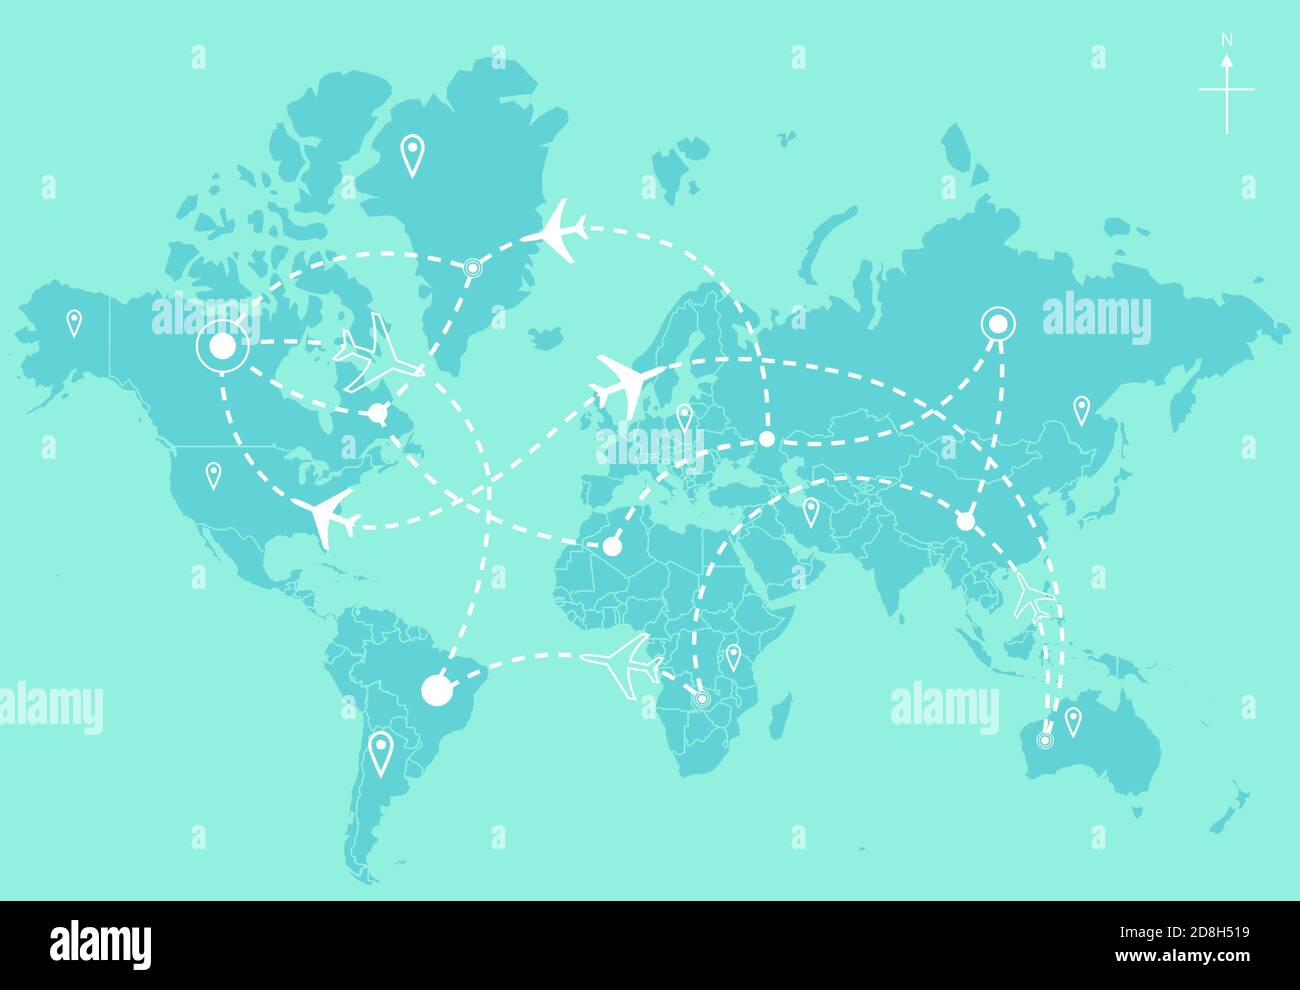 Airline Plane Flight Paths Travel Plans Map and world map Stock Photo